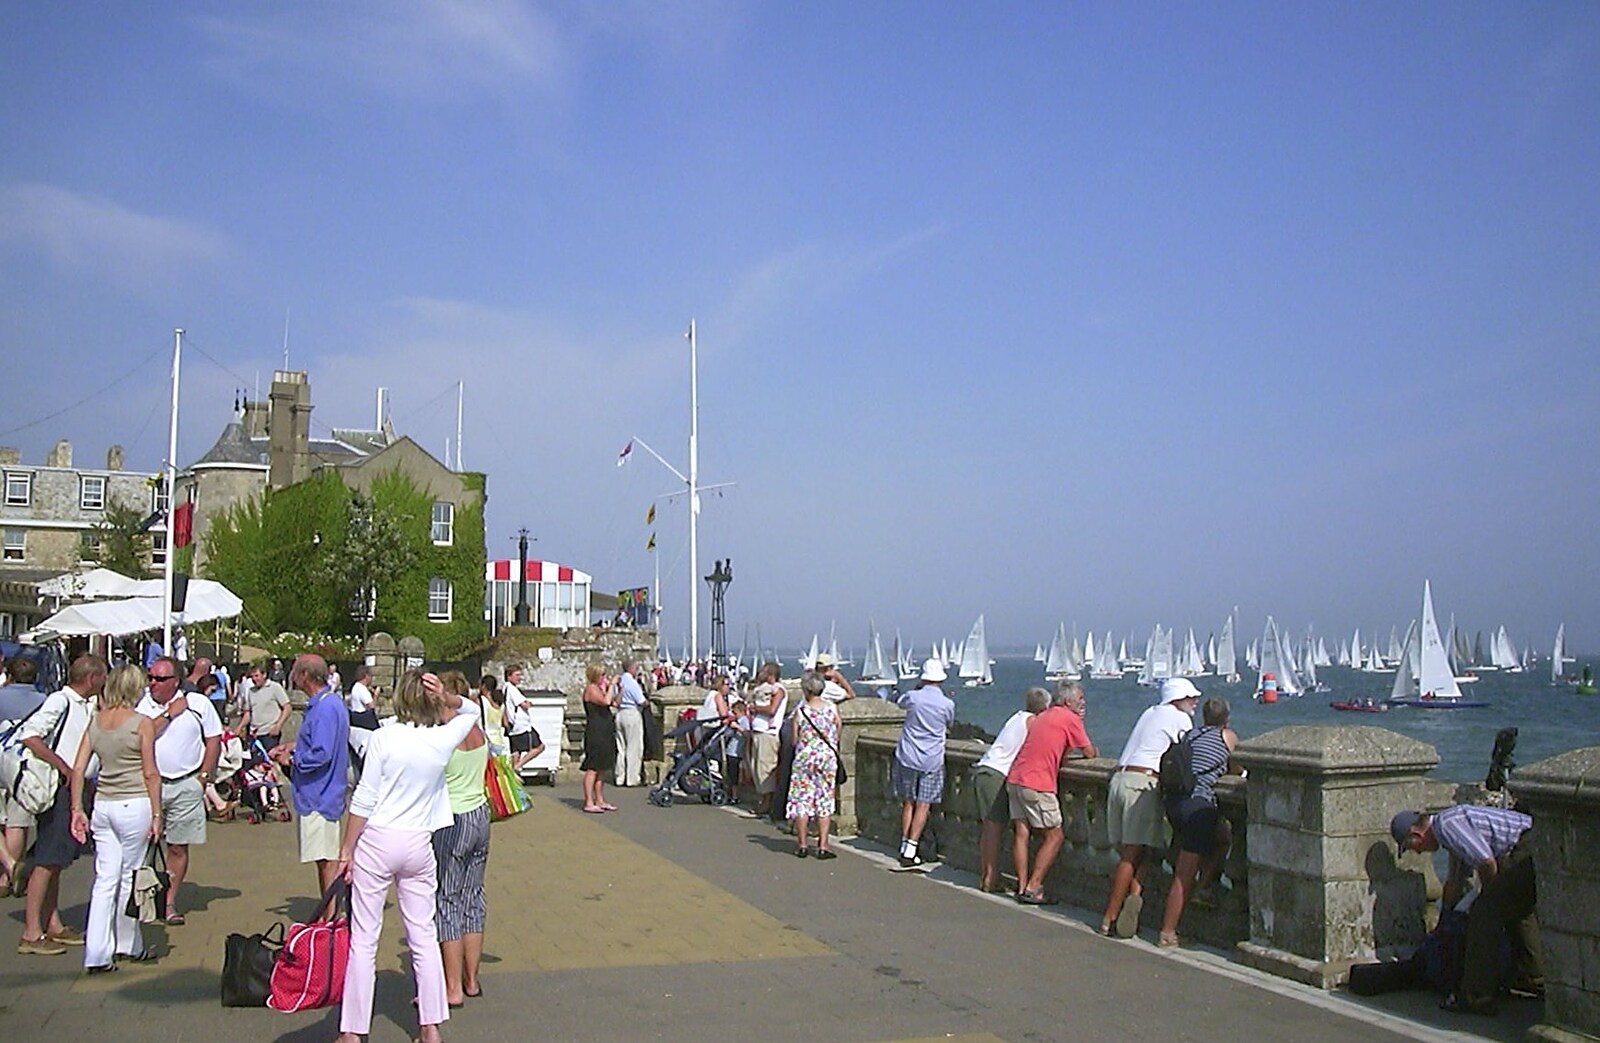 The crowds build up from Cowes Weekend, Cowes, Isle of Wight - 7th August 2004